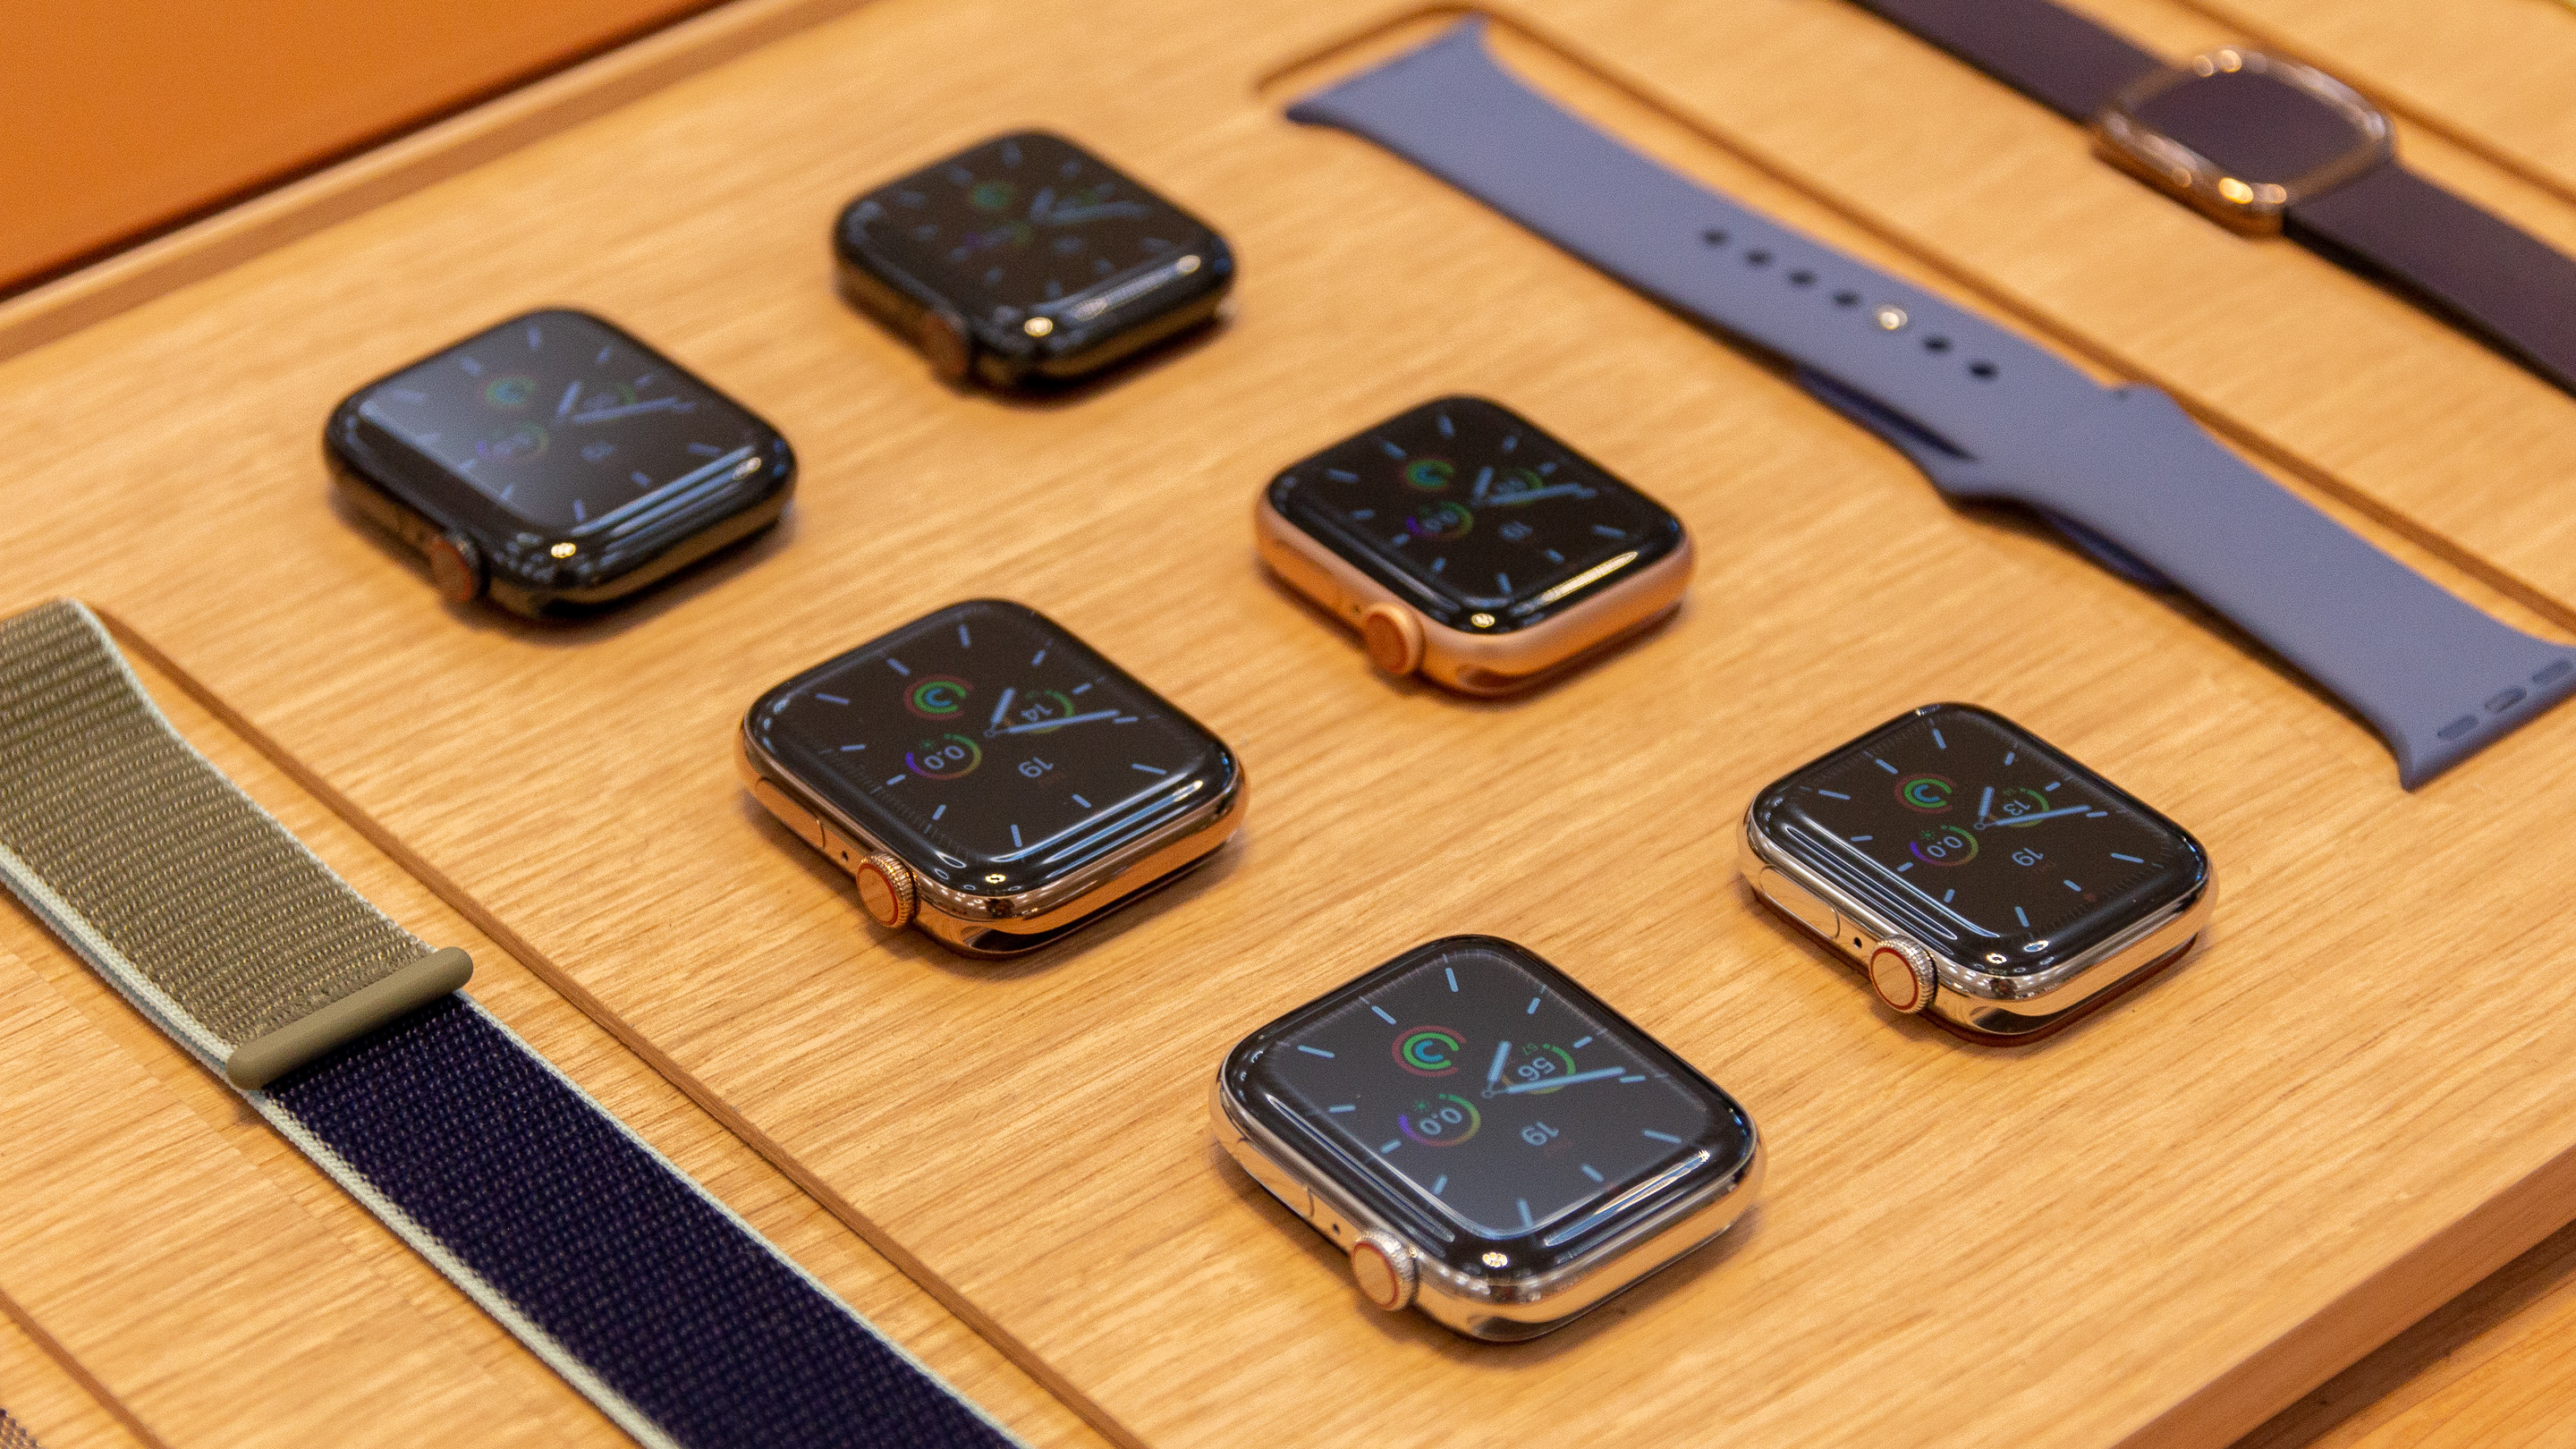 Apple Watch Studio: Hands-on with the 